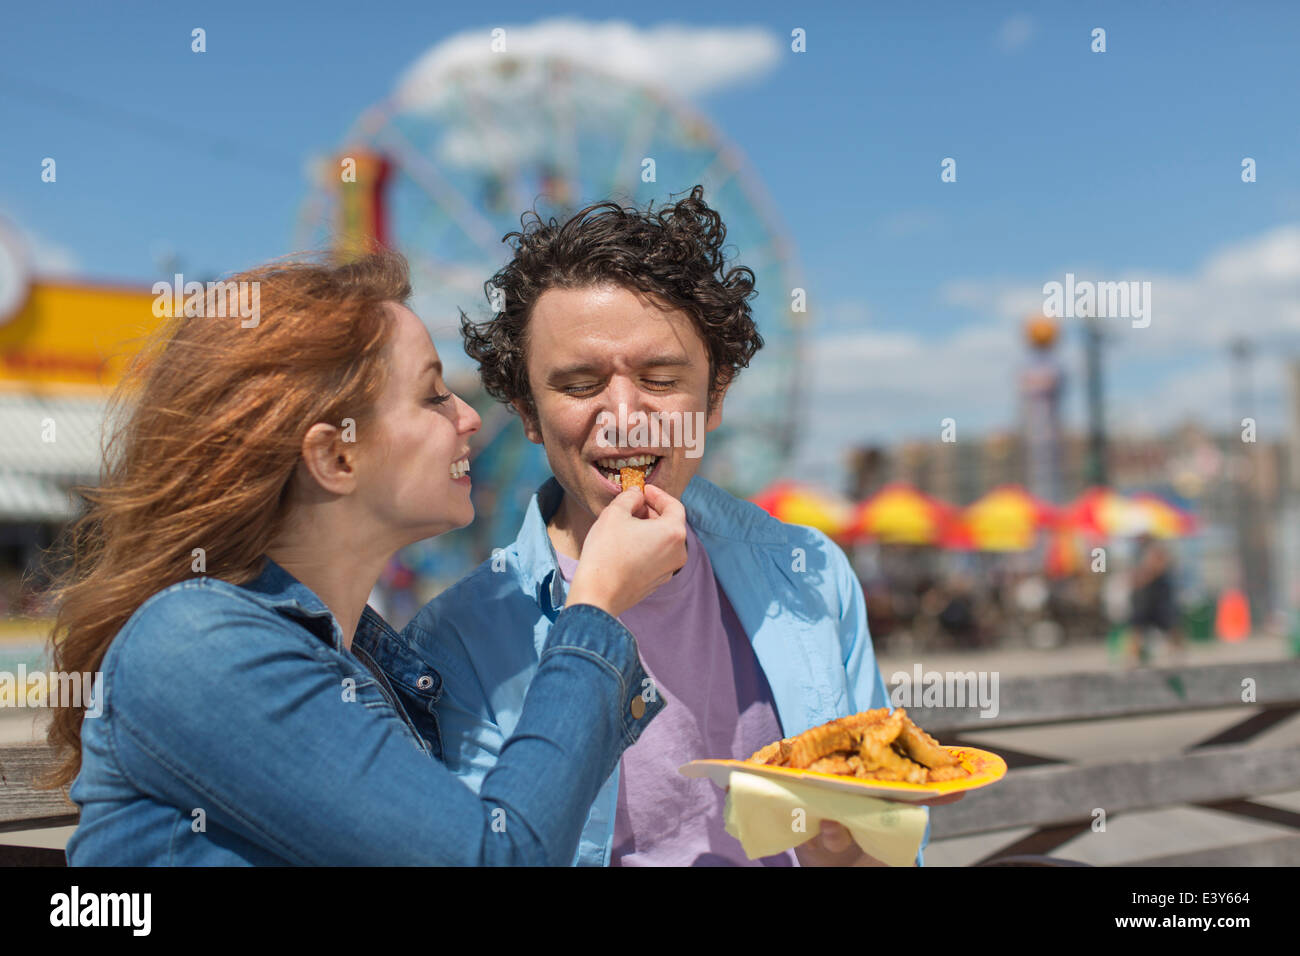 Romantic couple feeding each other chips at amusement park Stock Photo